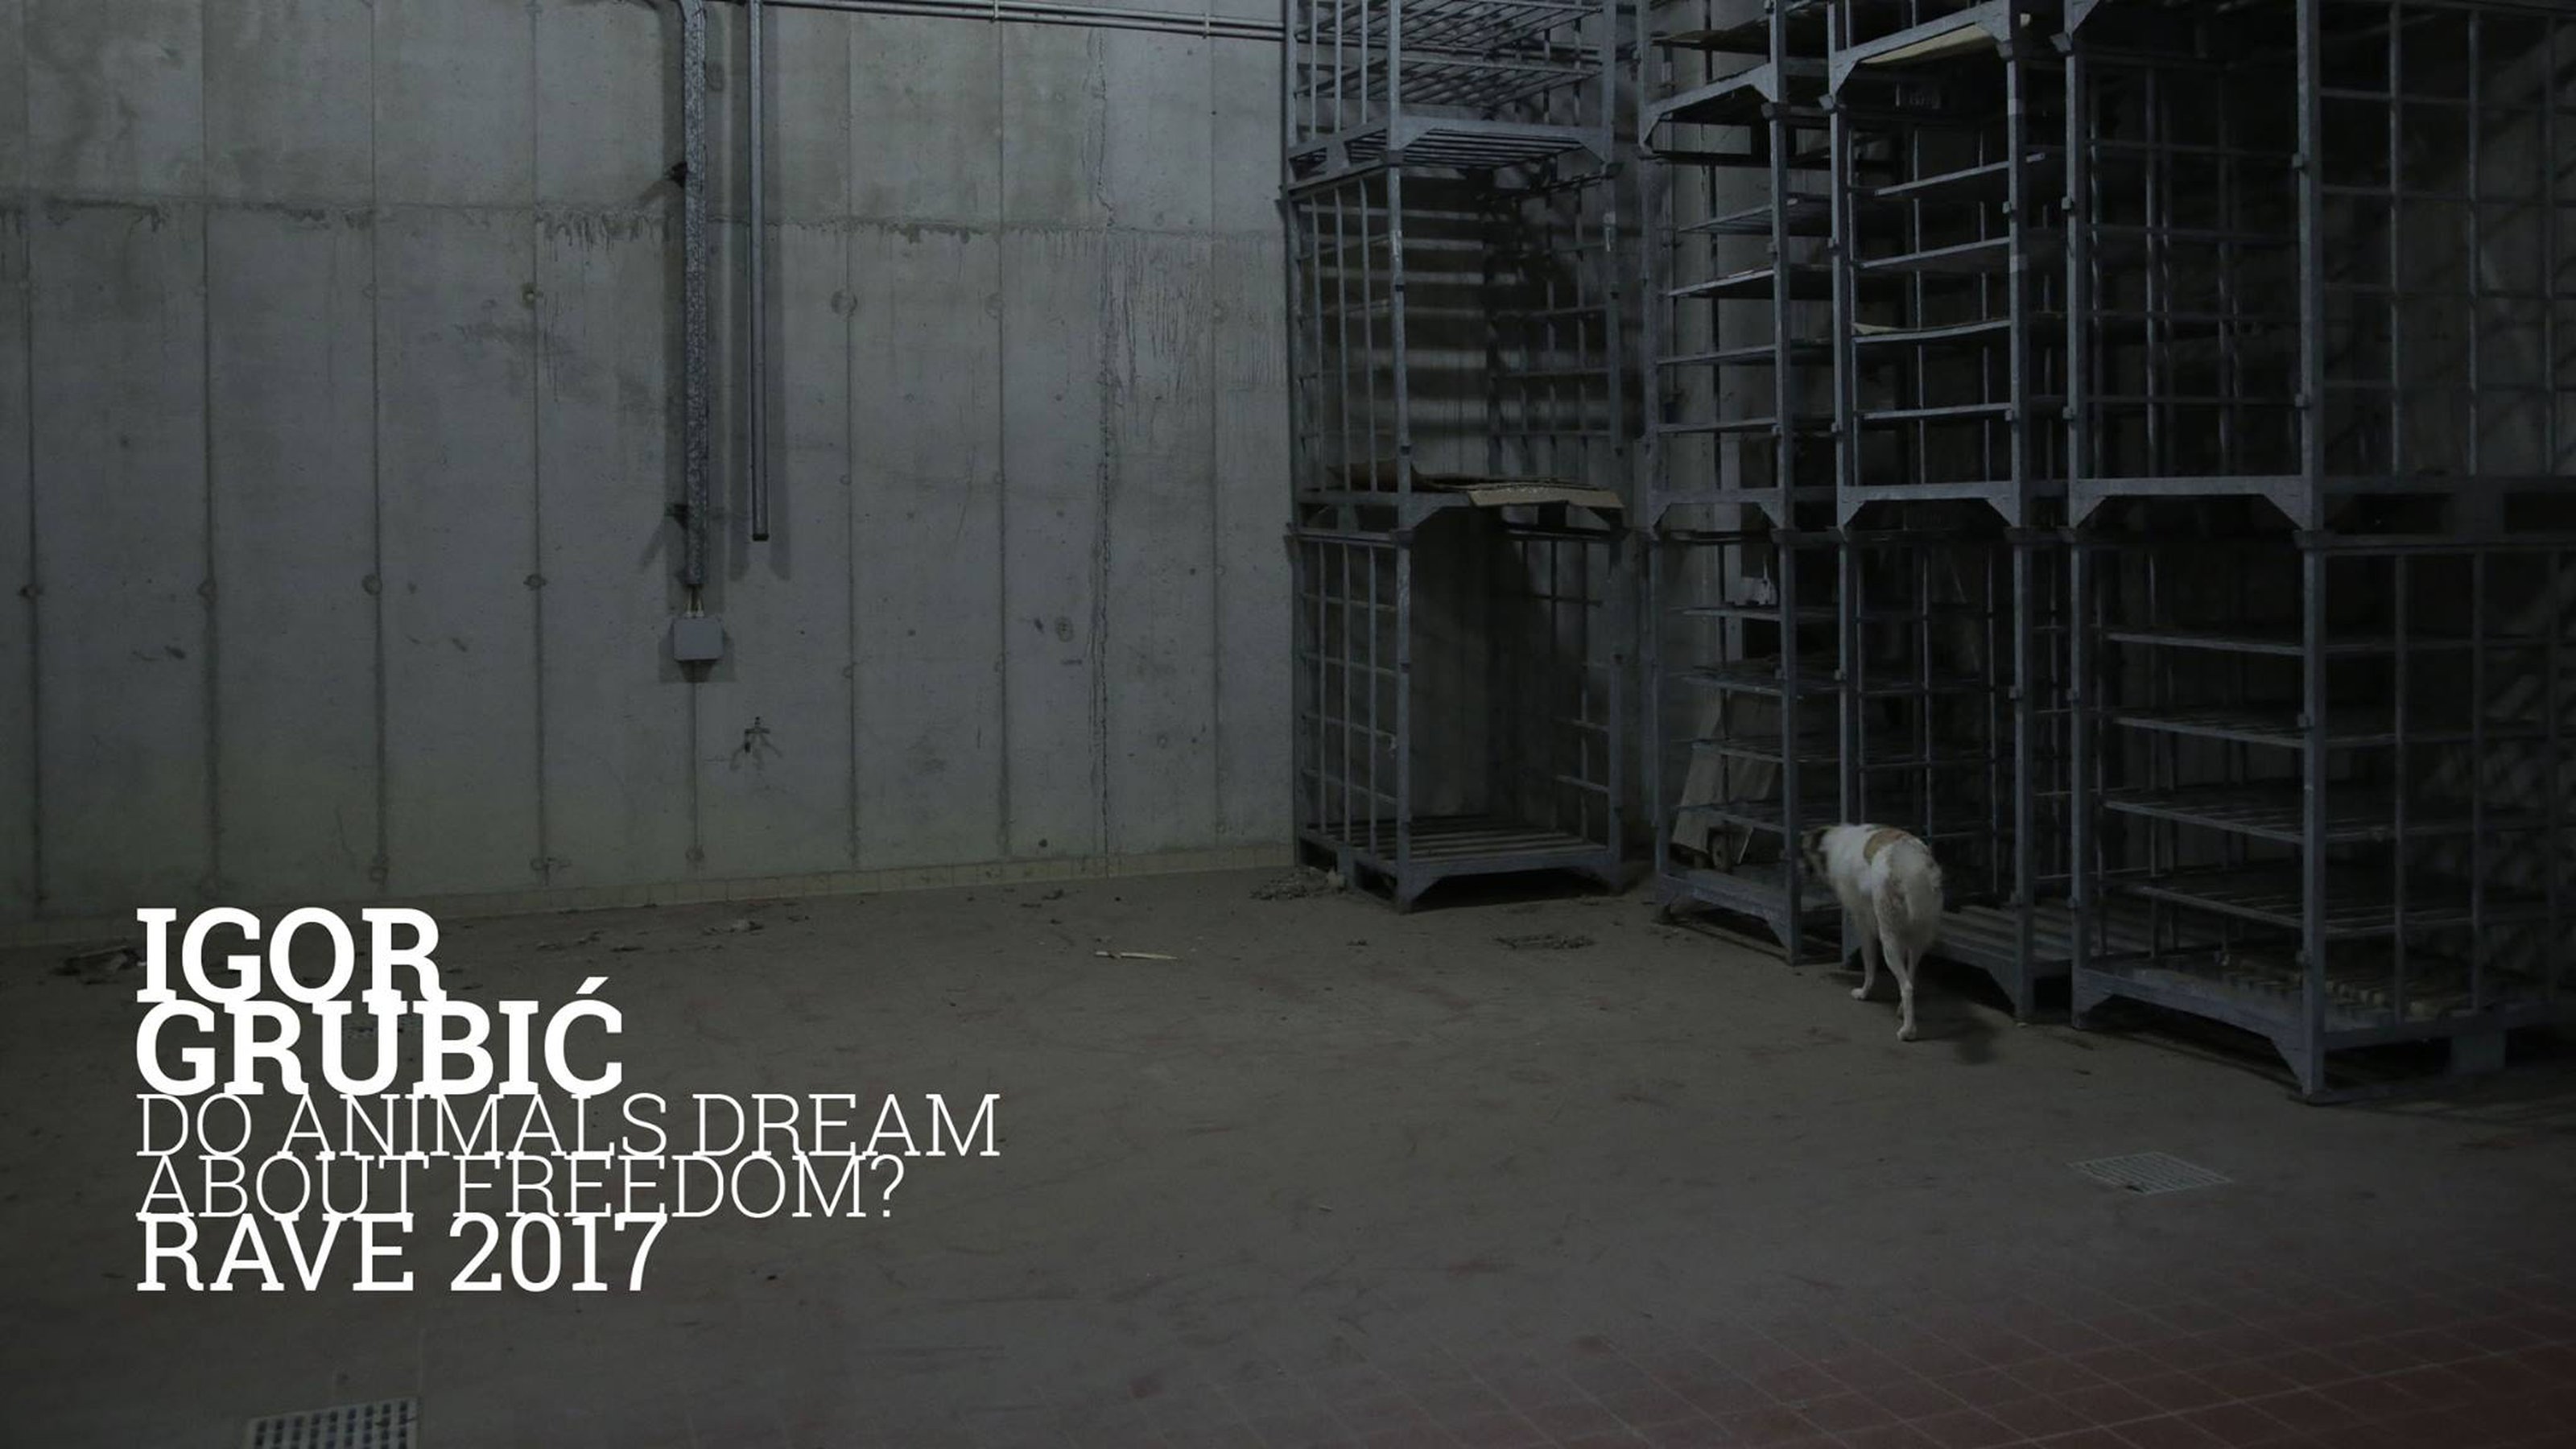 Do animals dream about freedom?